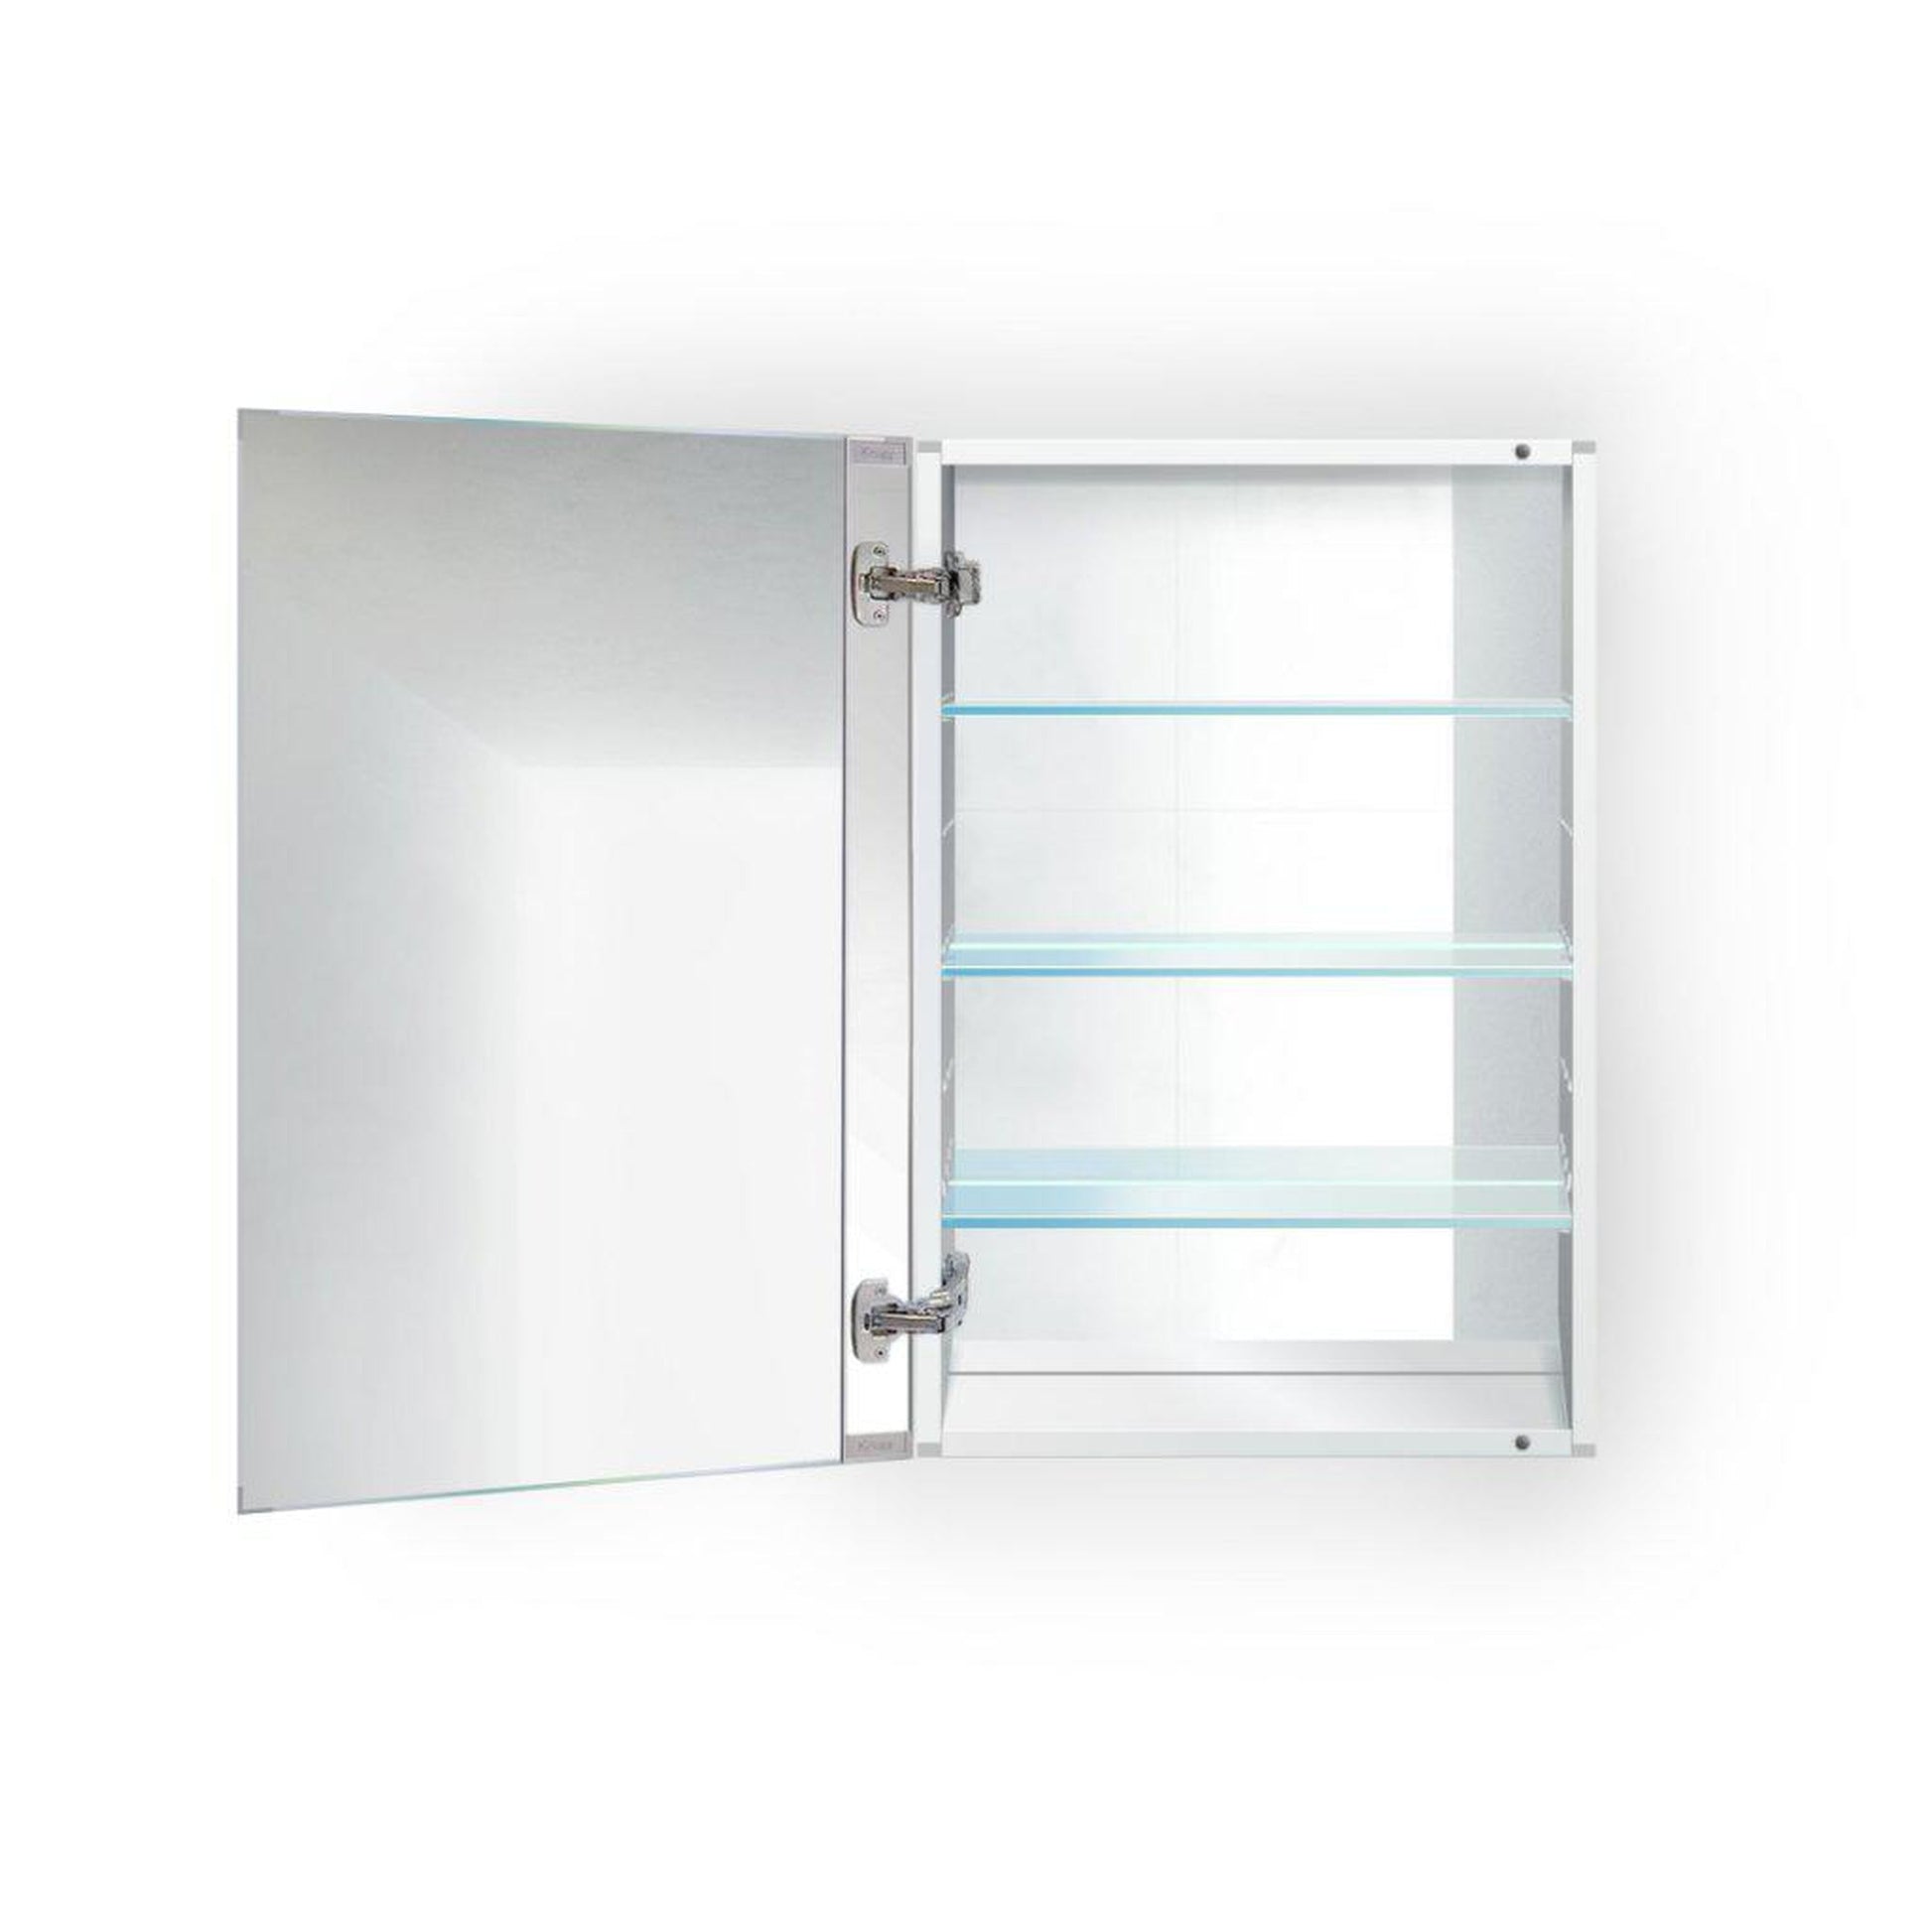 Krugg Reflections Plaza 20" x 30" Single Left Opening Rectangular Recessed/Surface-Mount Medicine Cabinet Mirror With Three Adjustable Shelves